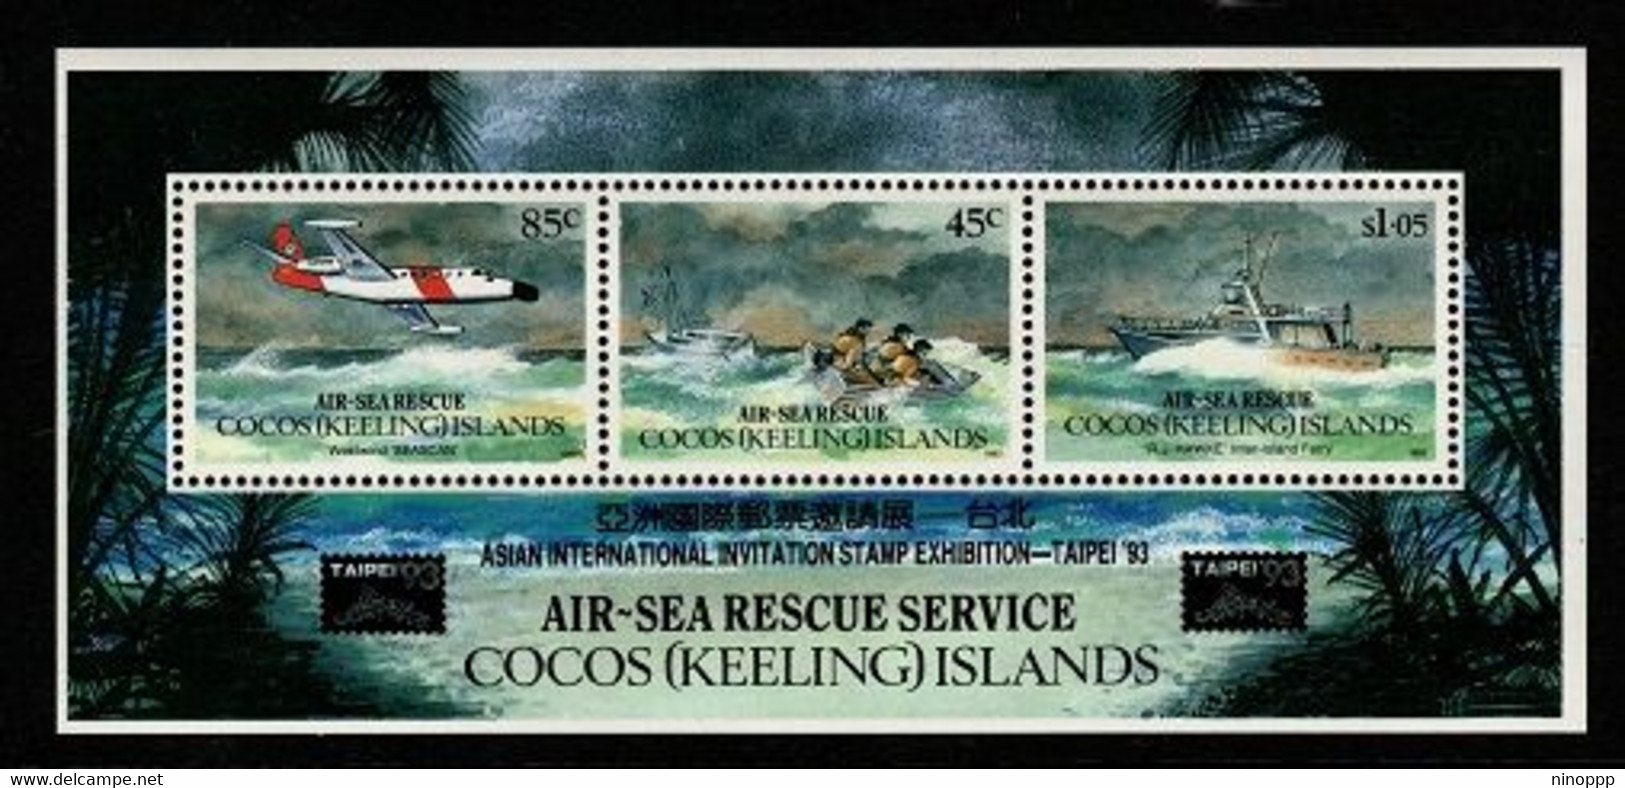 Cocos (keeling) Islands   SG 292  1993 Air-sea Rescue Service, Souvenir Sheet,Overprinted Taipei.Mint Never Hinged - Isole Cocos (Keeling)